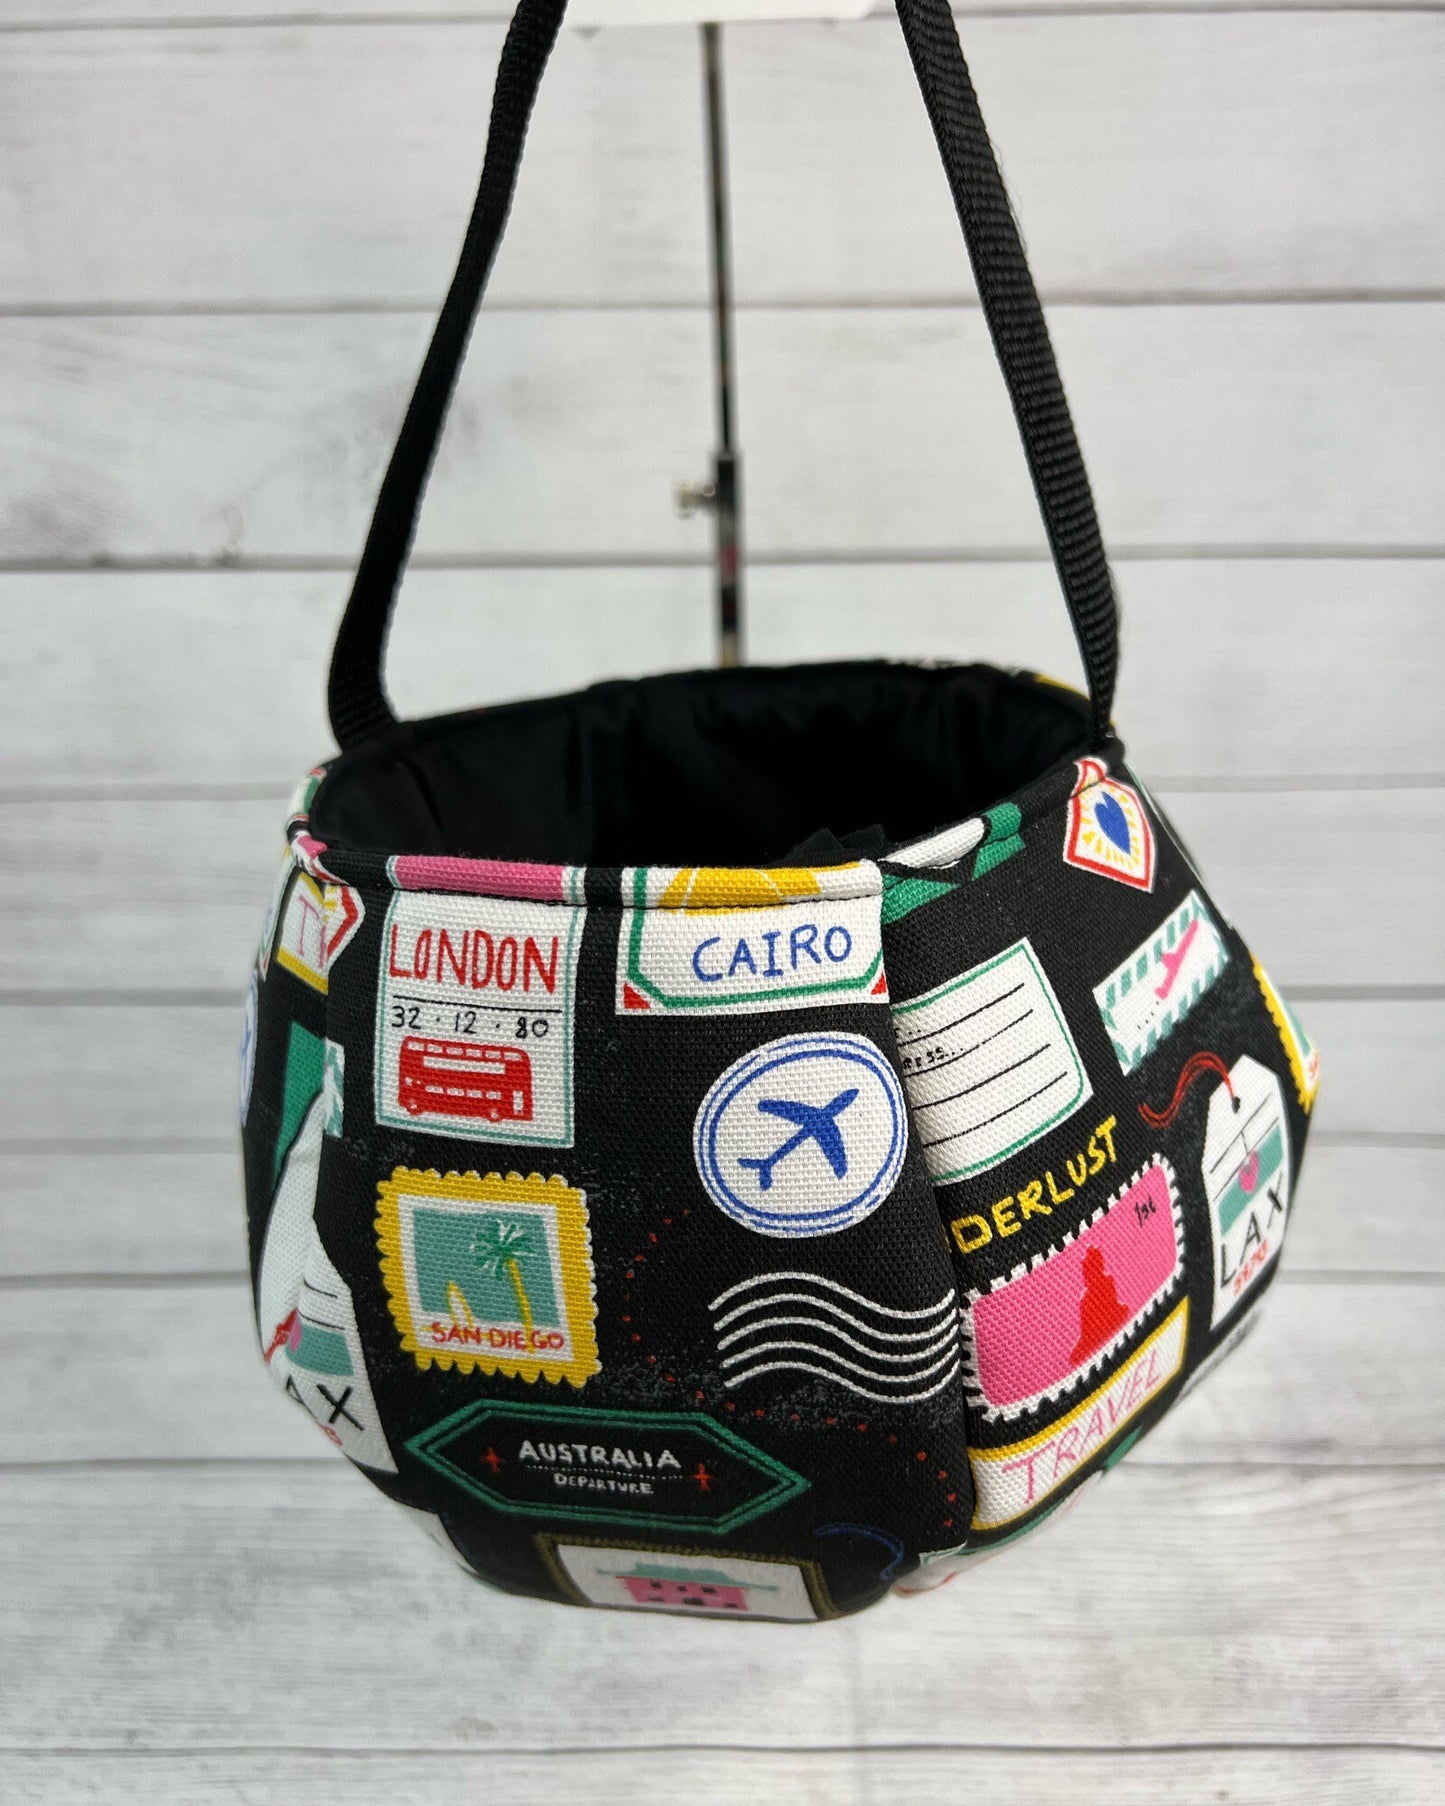 Travel International Bag Tote - Stamps - World Travel - Kids - France - England - Gift - Everyday - Holiday - Easter - Halloween - Party